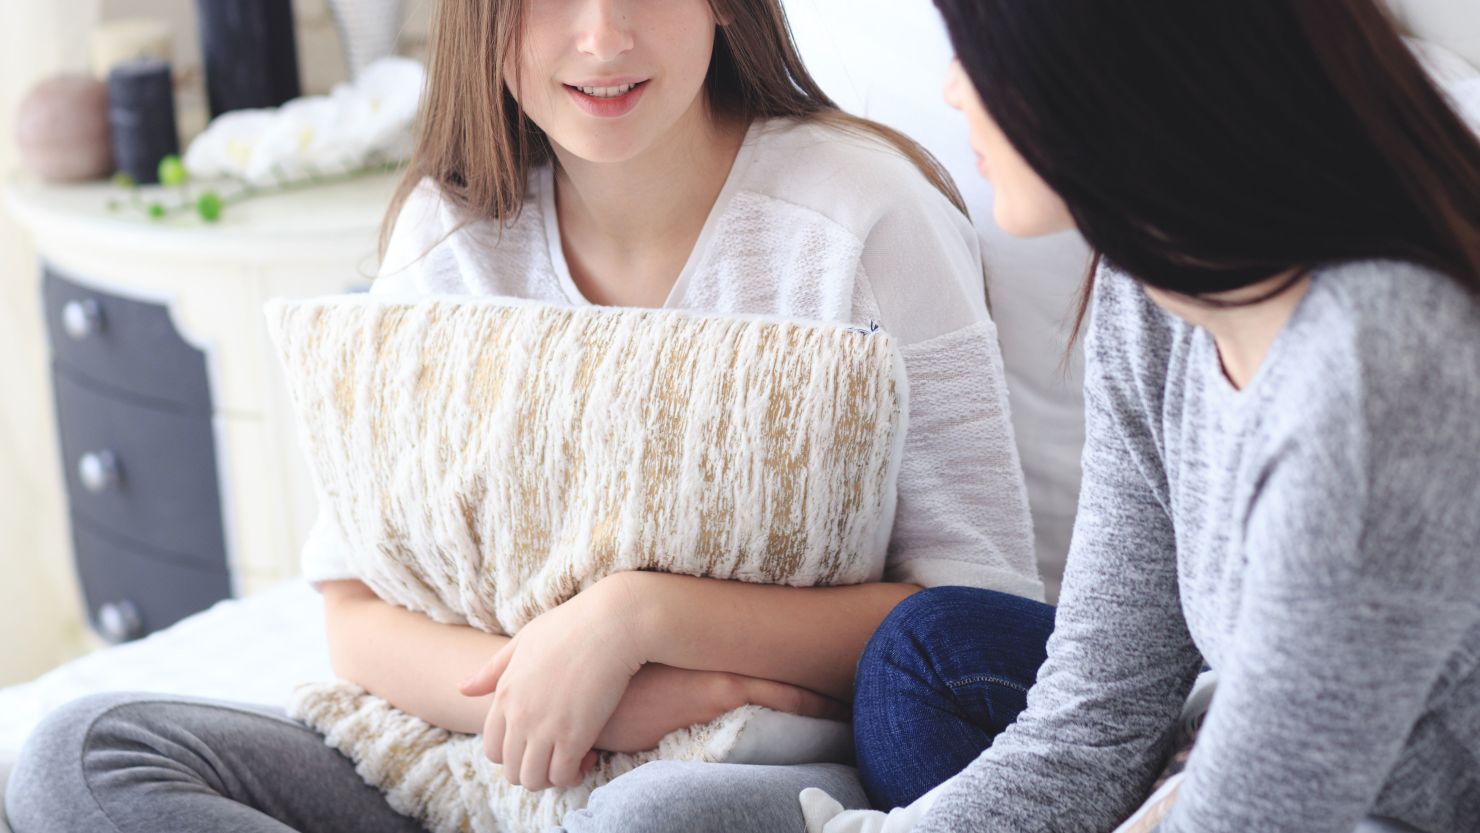 What parents need to know about guiding kids through puberty